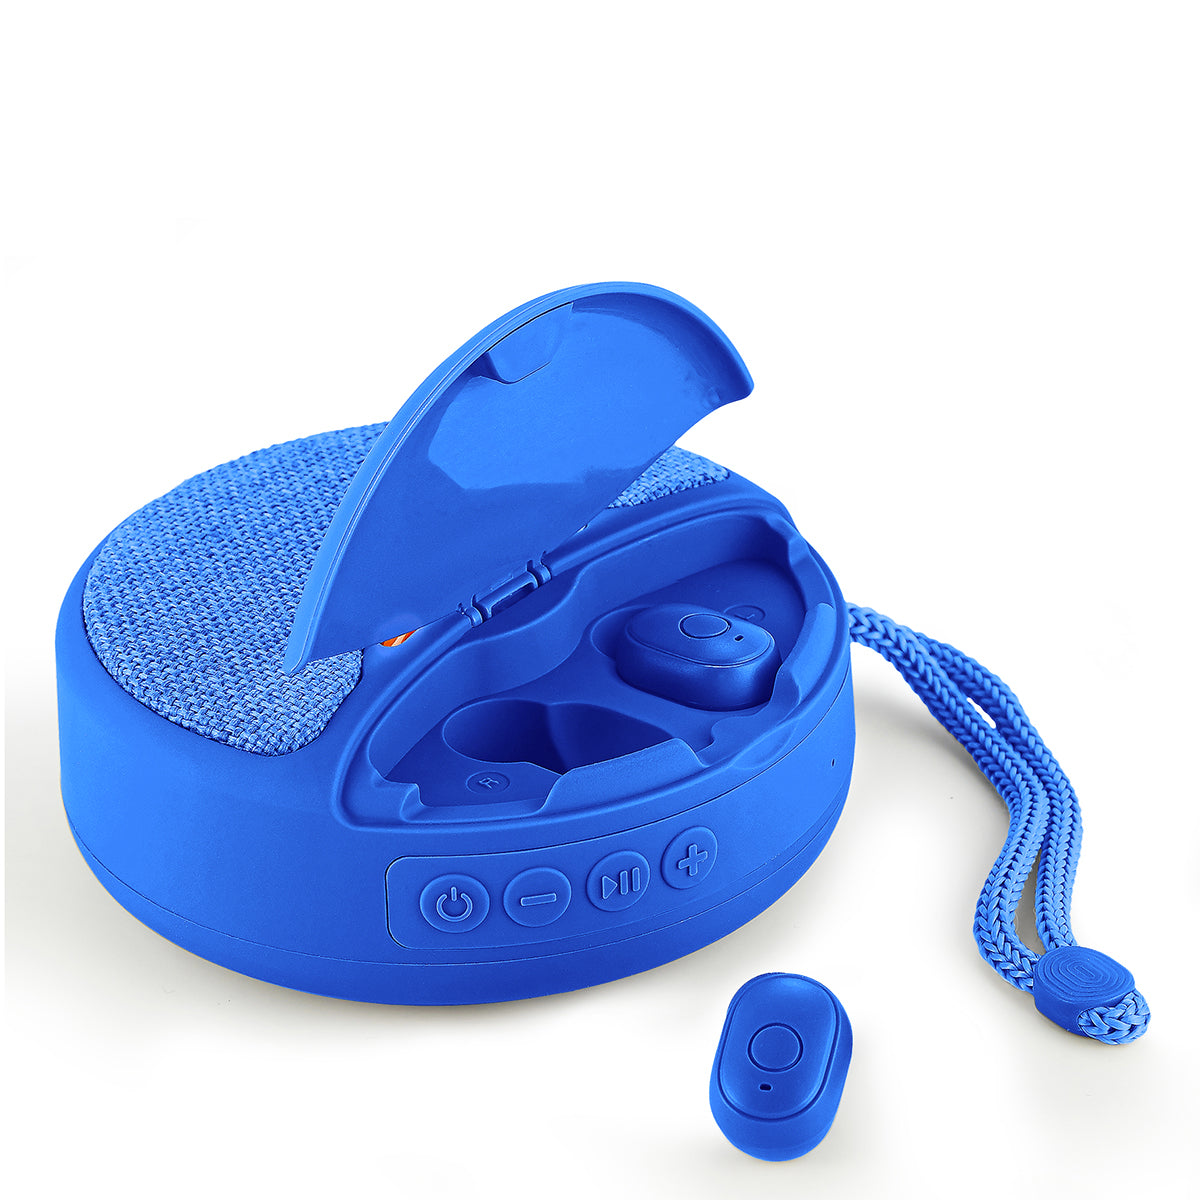 SPUDS – Wireless Earbuds with Built-in Speaker